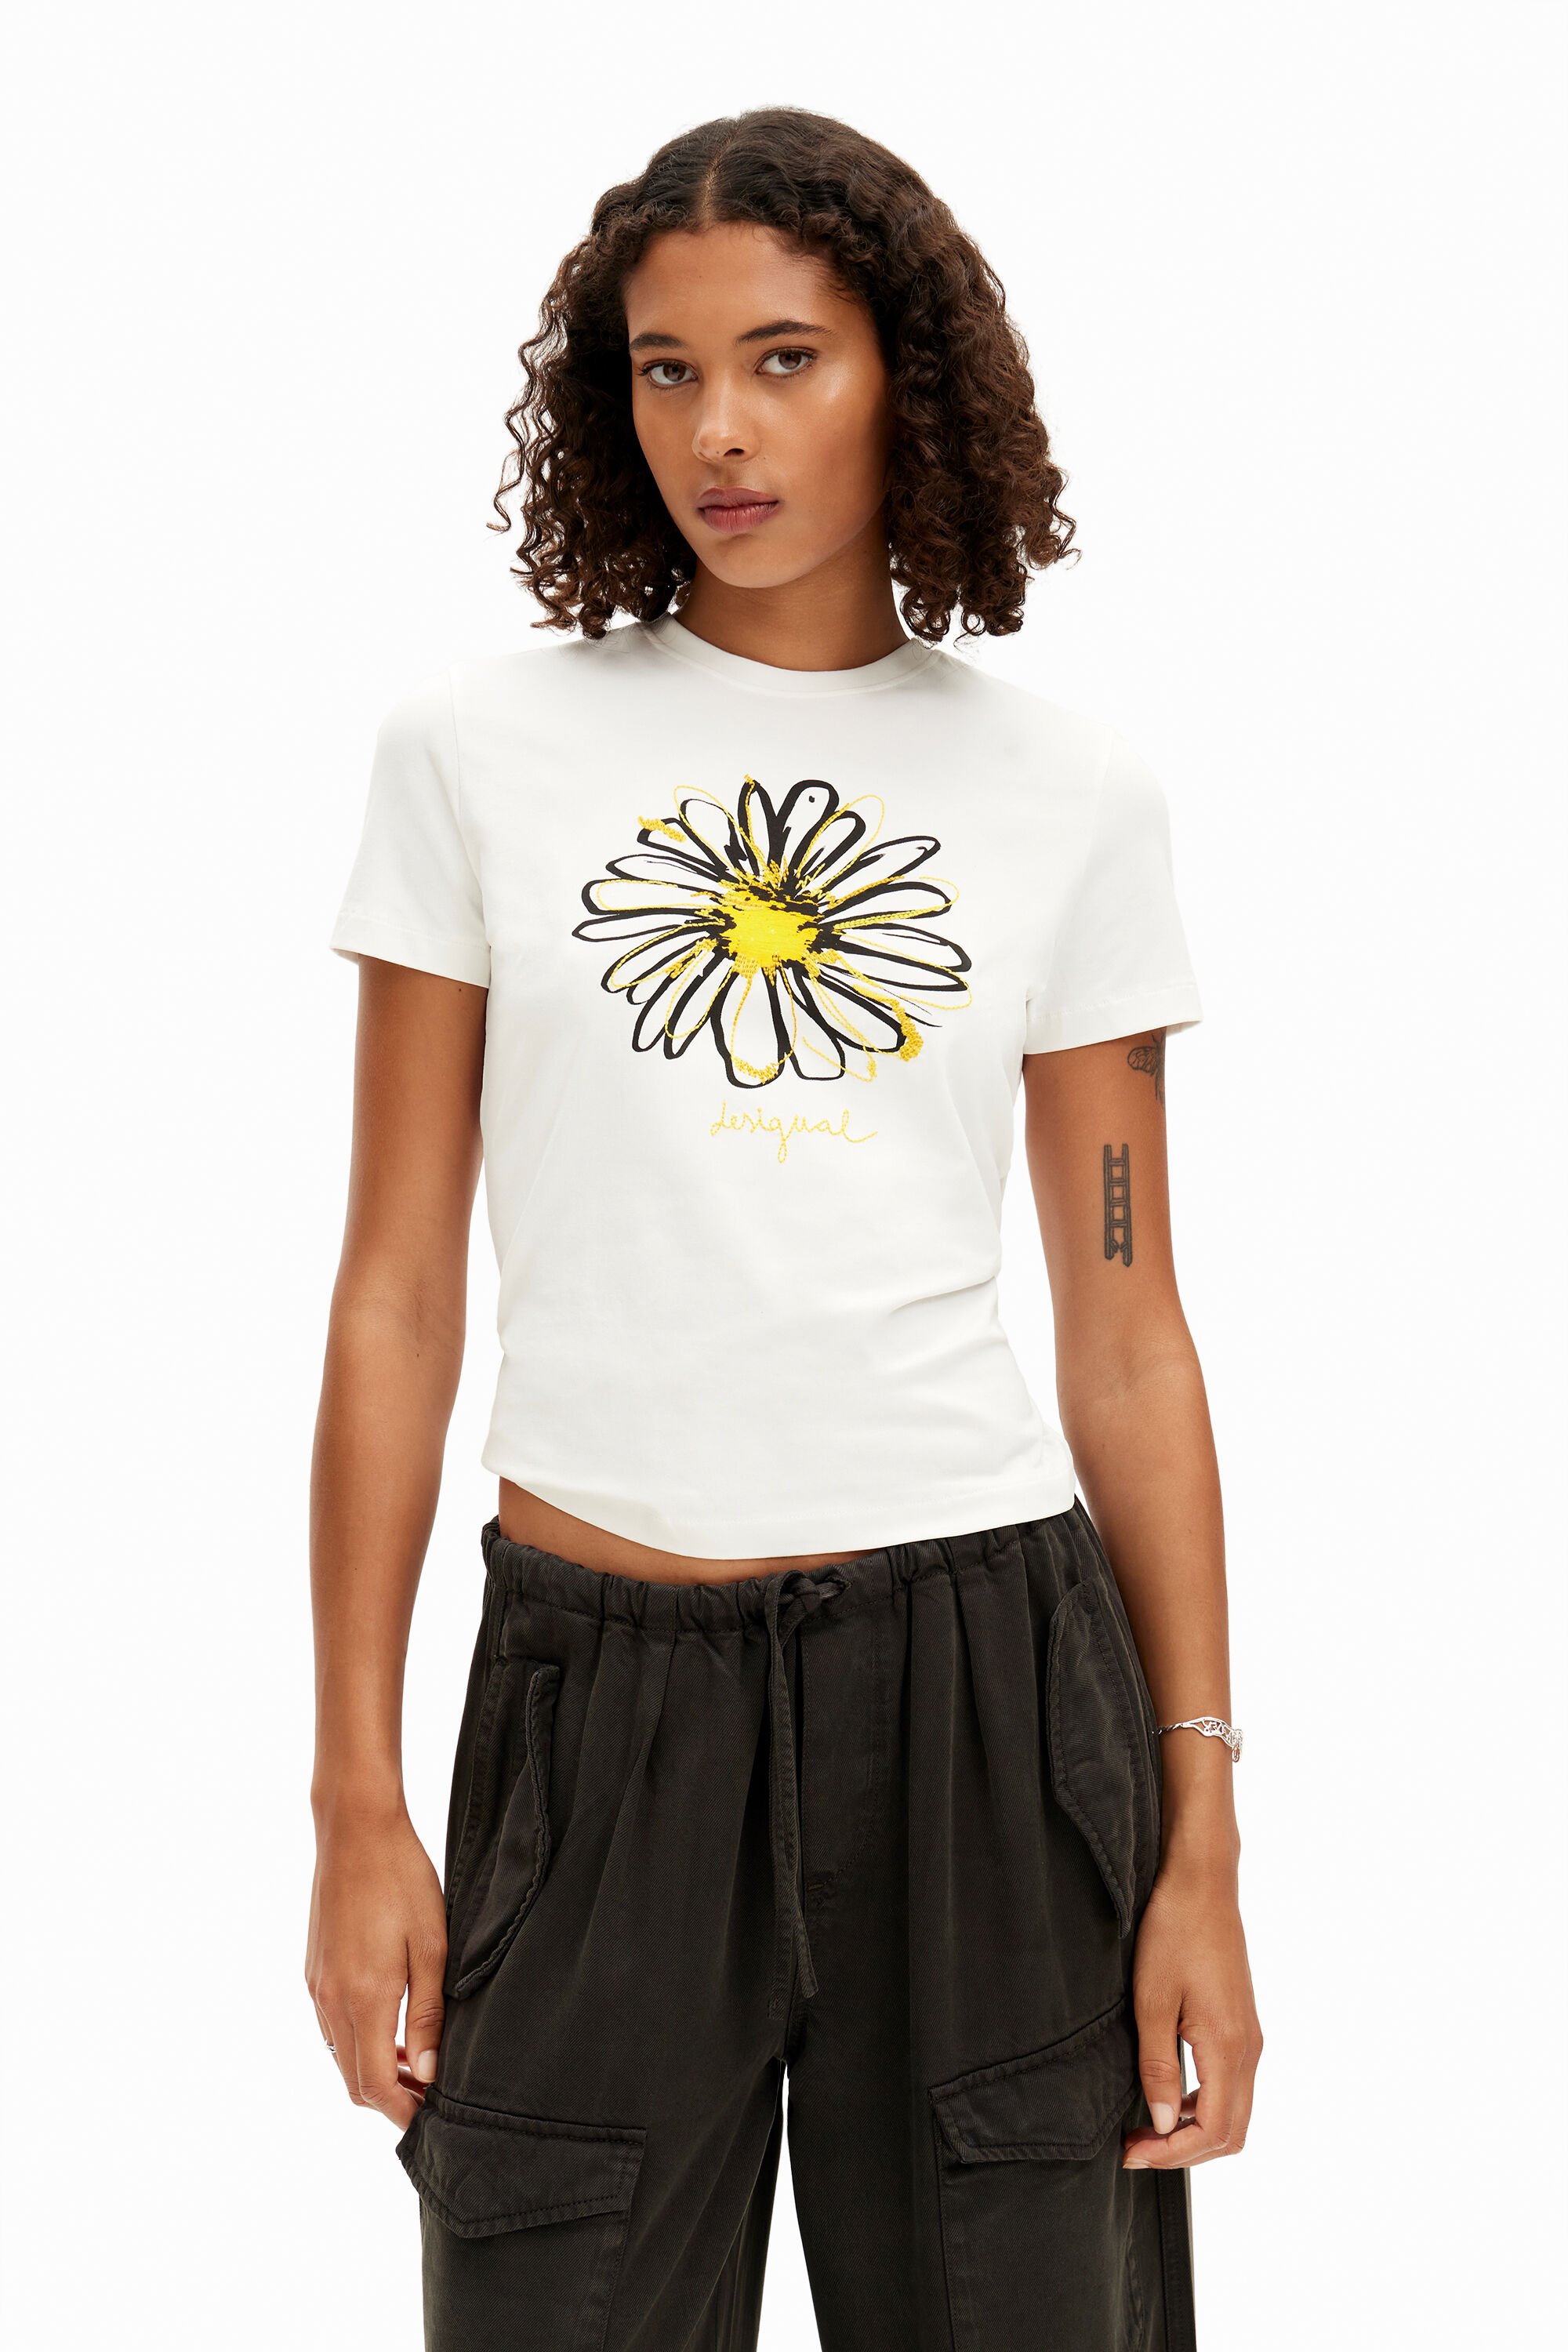 Desigual T-shirt illustratie madeliefje - WHITE